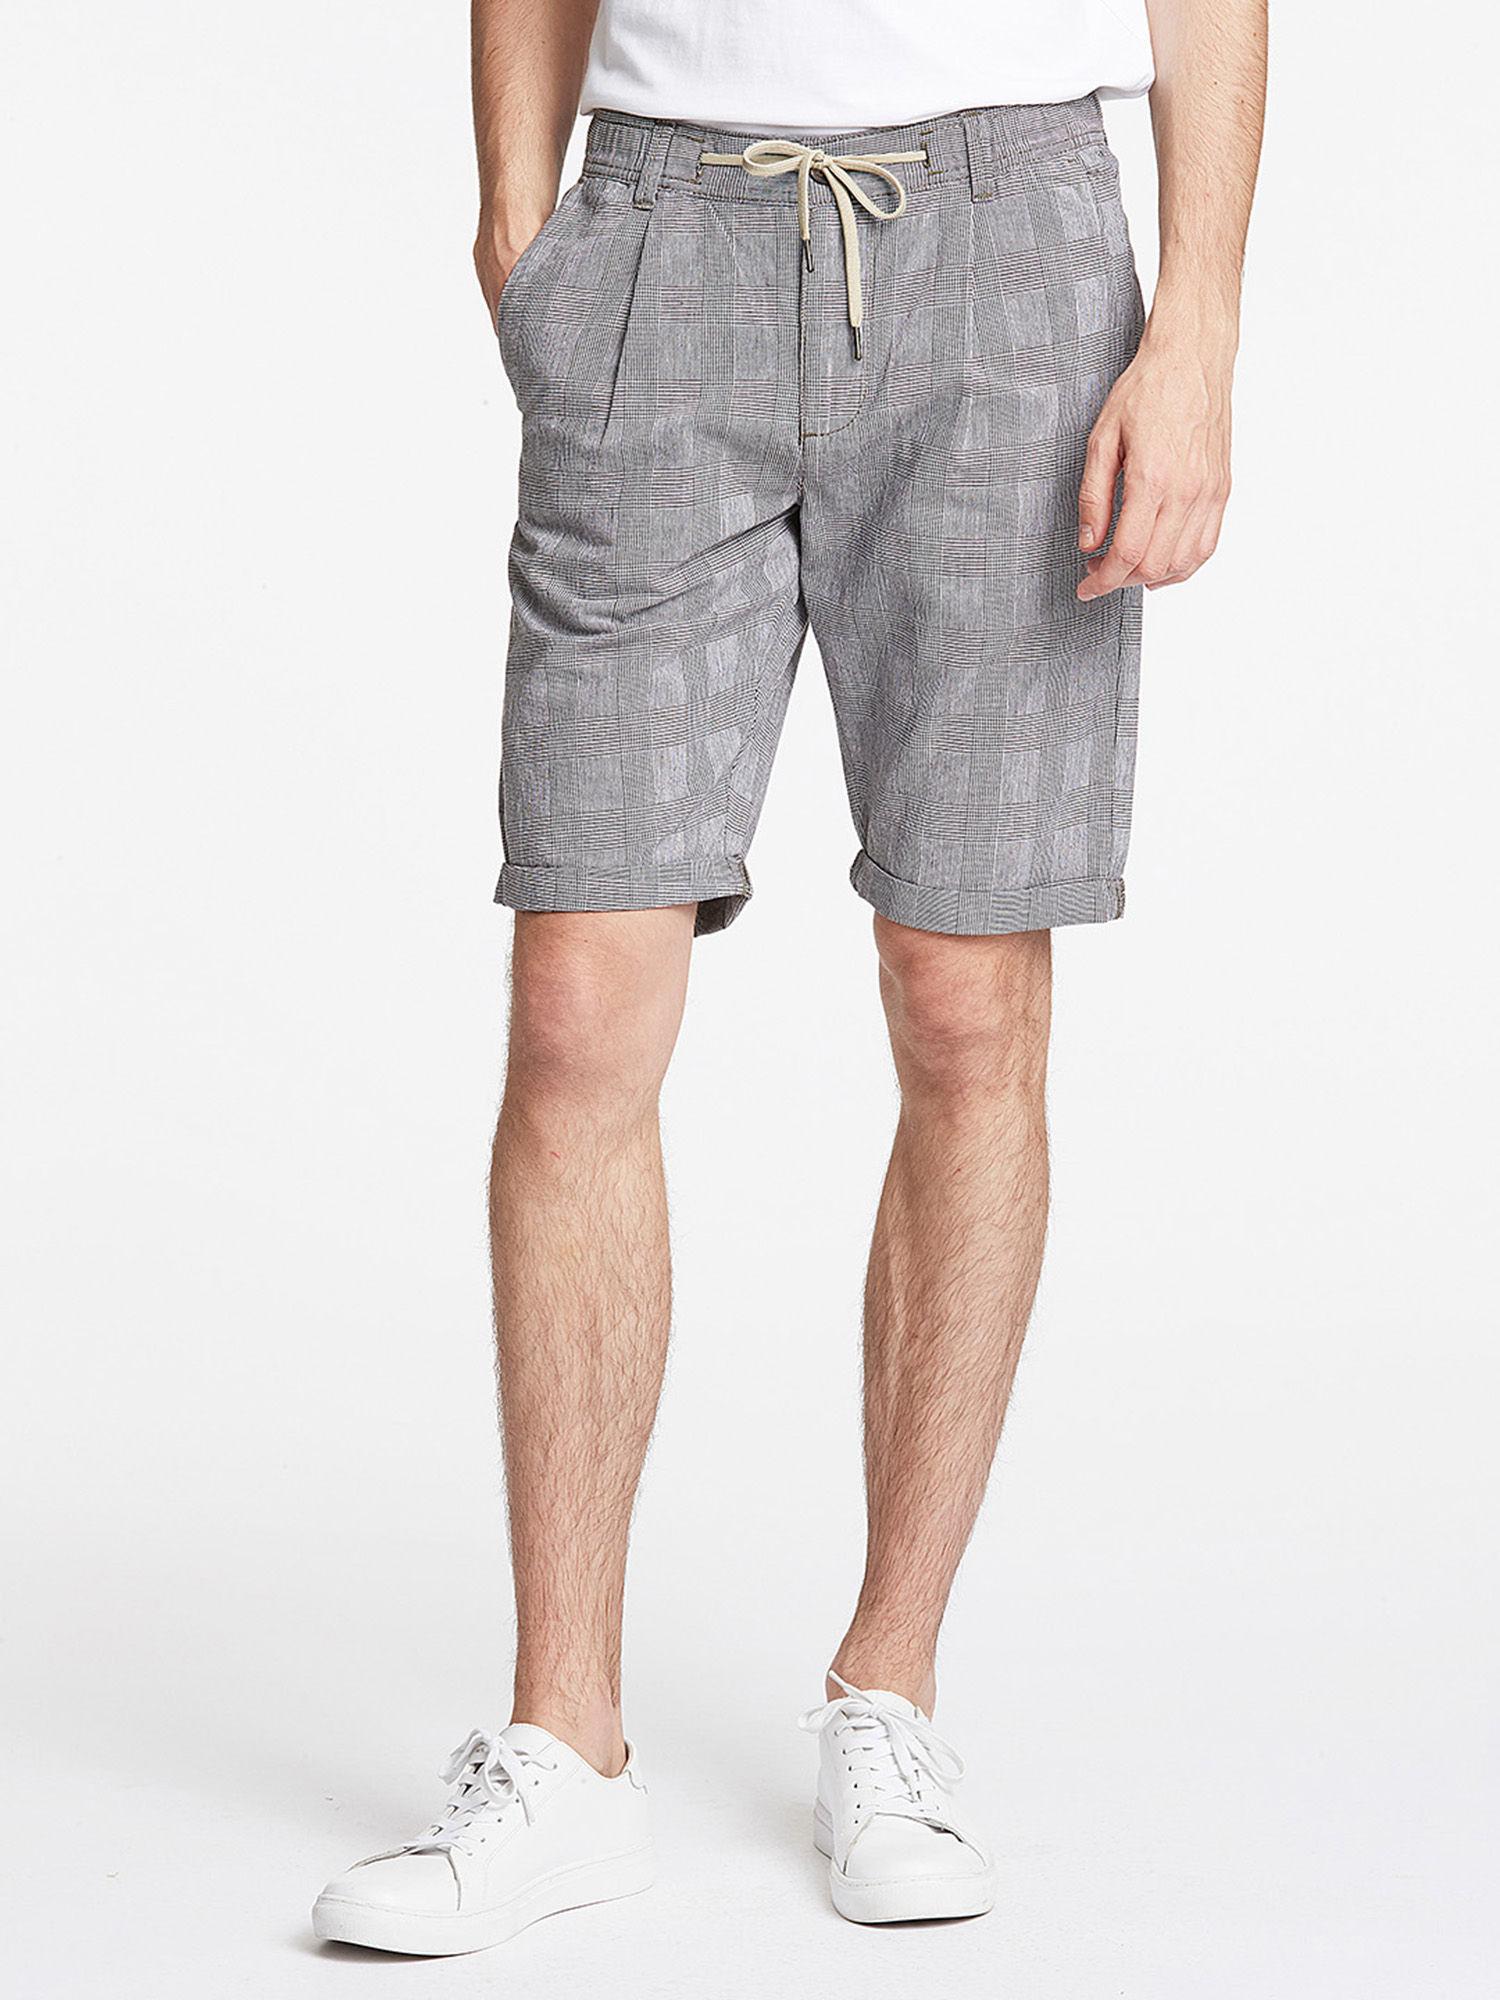 grey-checked-relaxed-fit-shorts